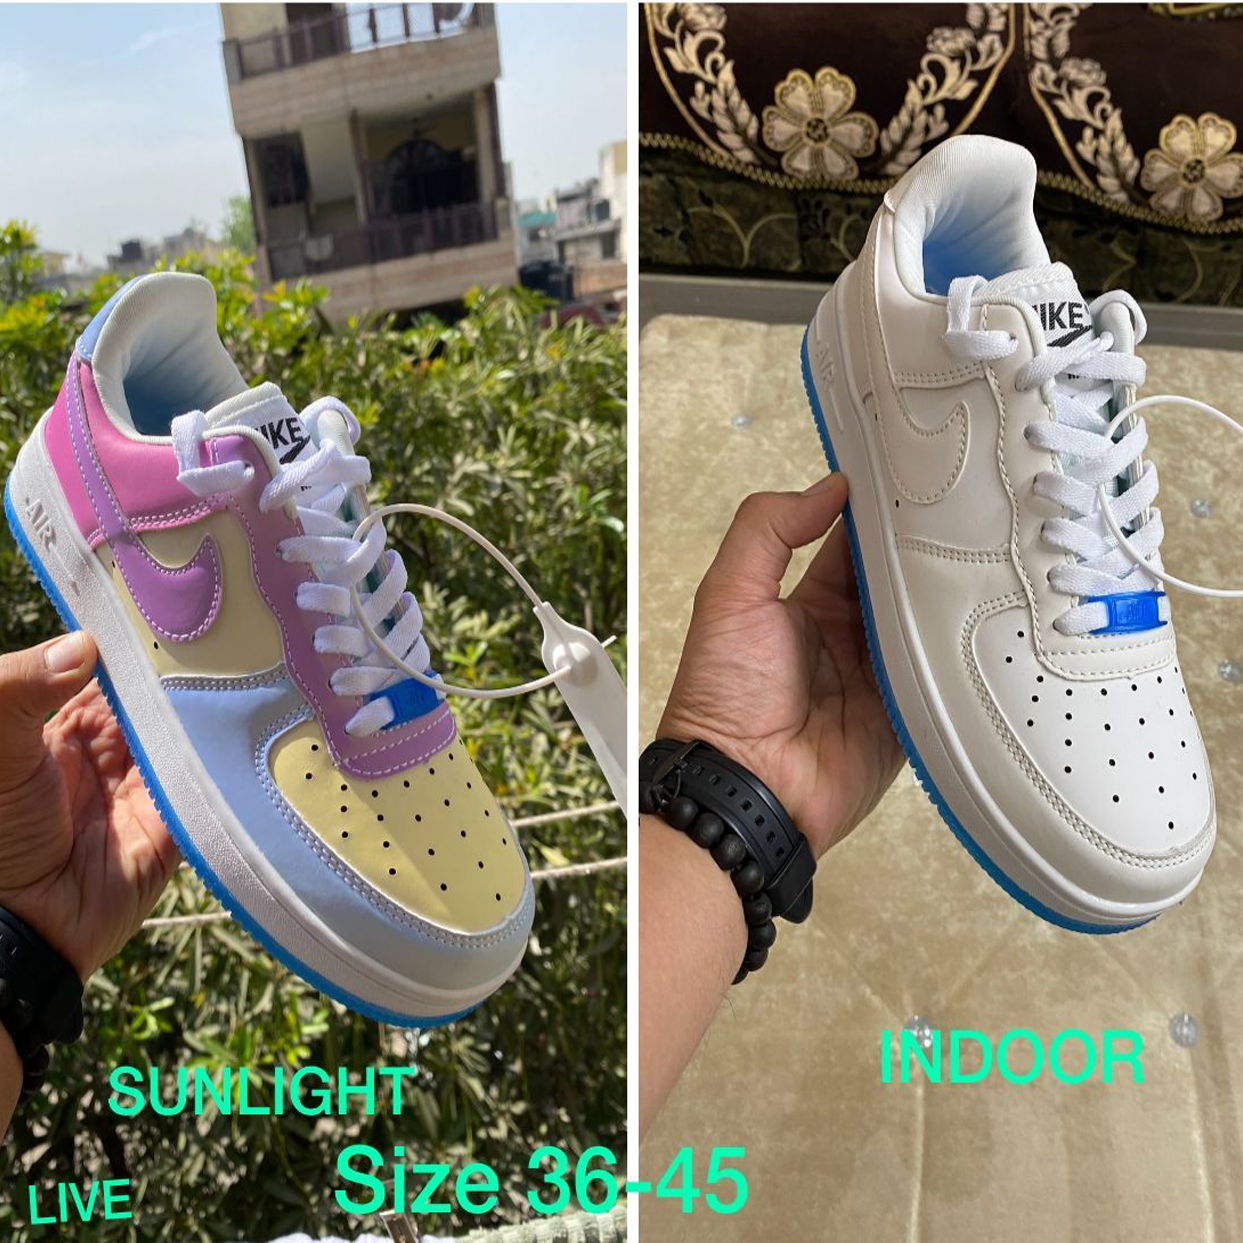 Nike Air force colour changing First Copy shoe